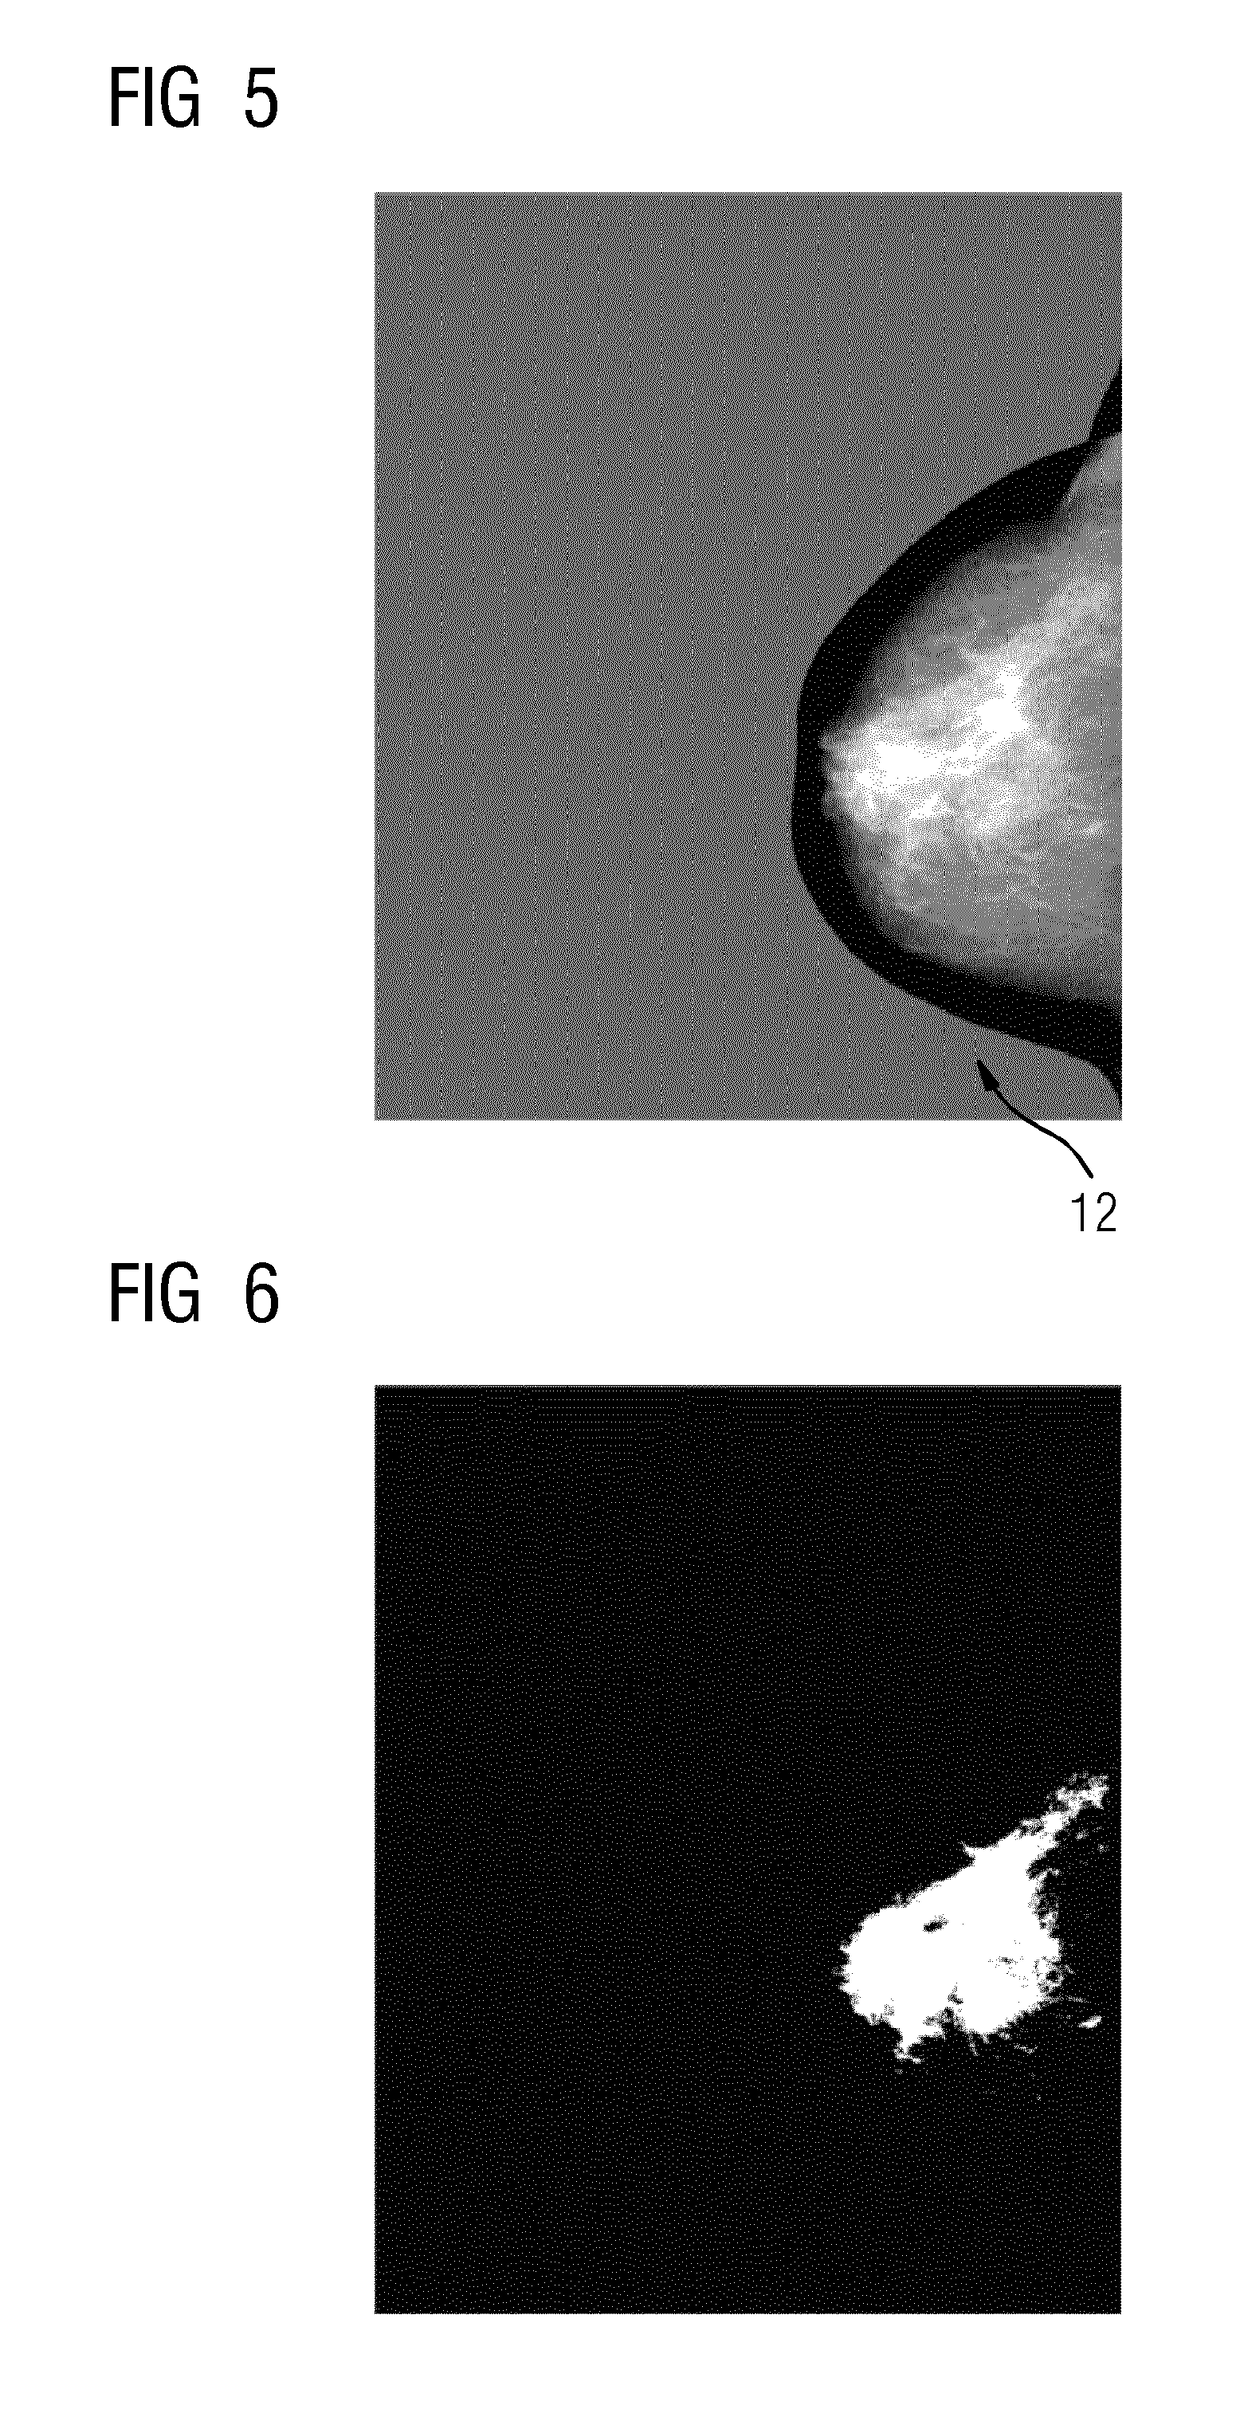 Evaluation of an x-ray image of a breast produced during a mammography